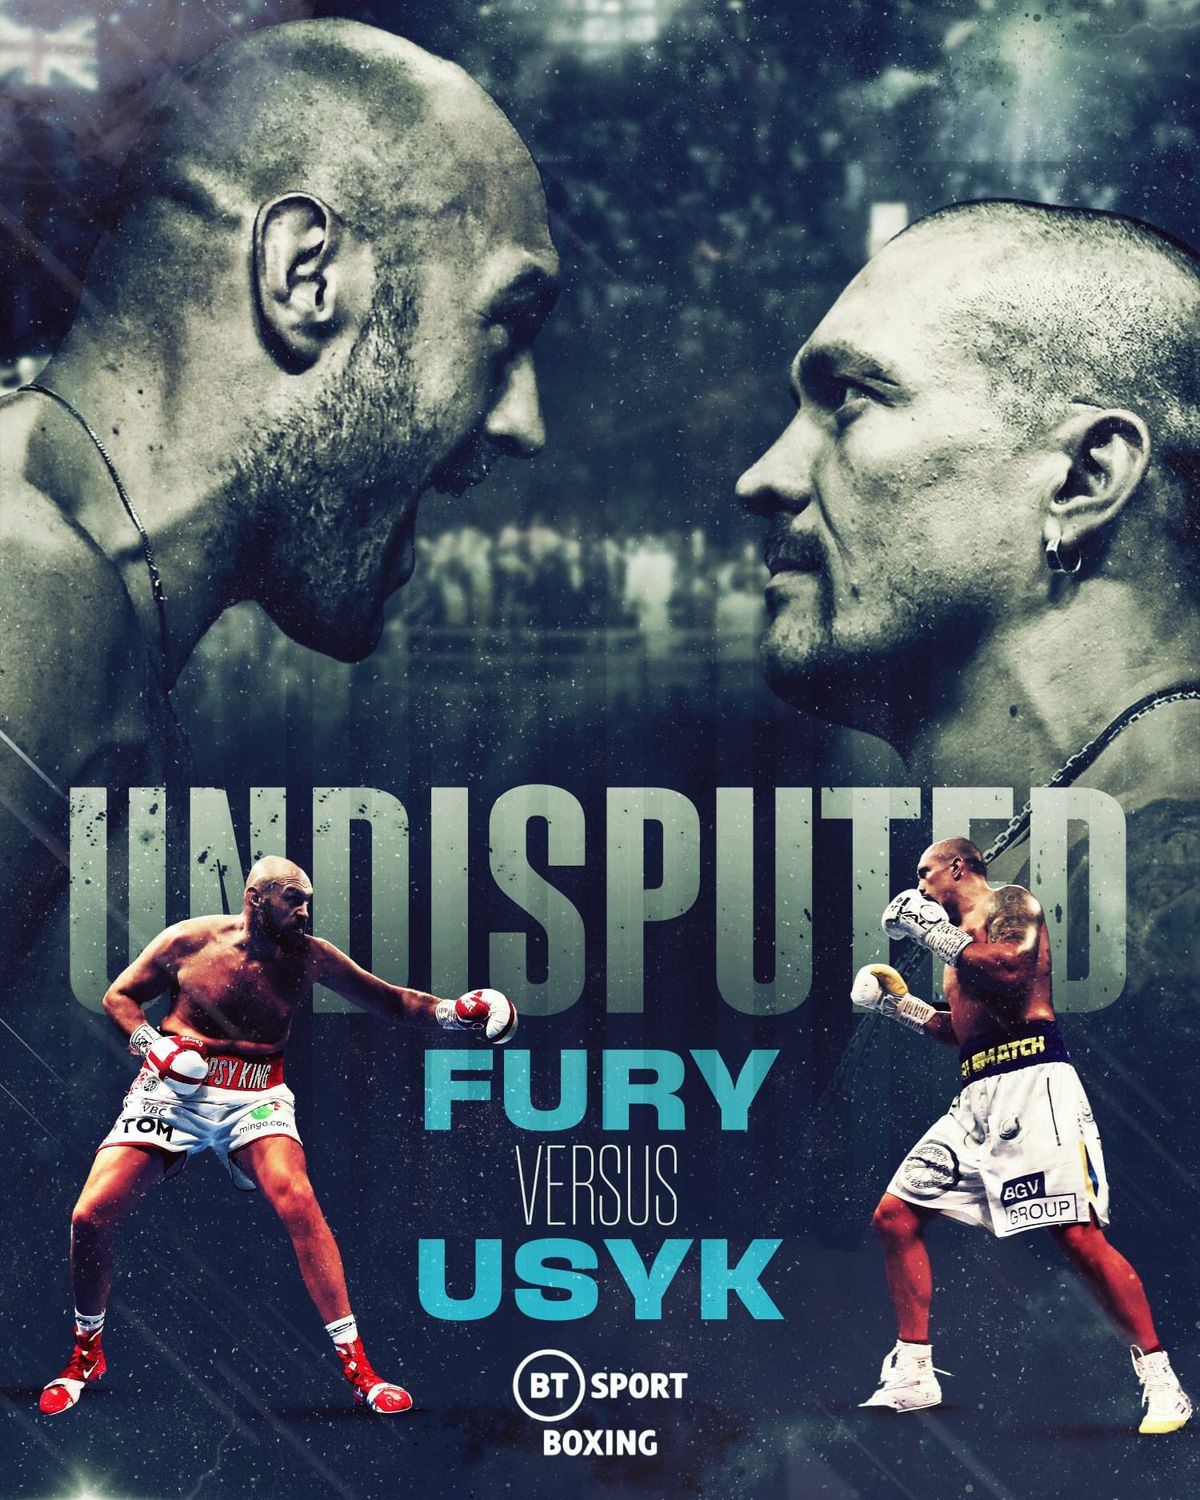 FURY VS USYK LIVE BOXING 